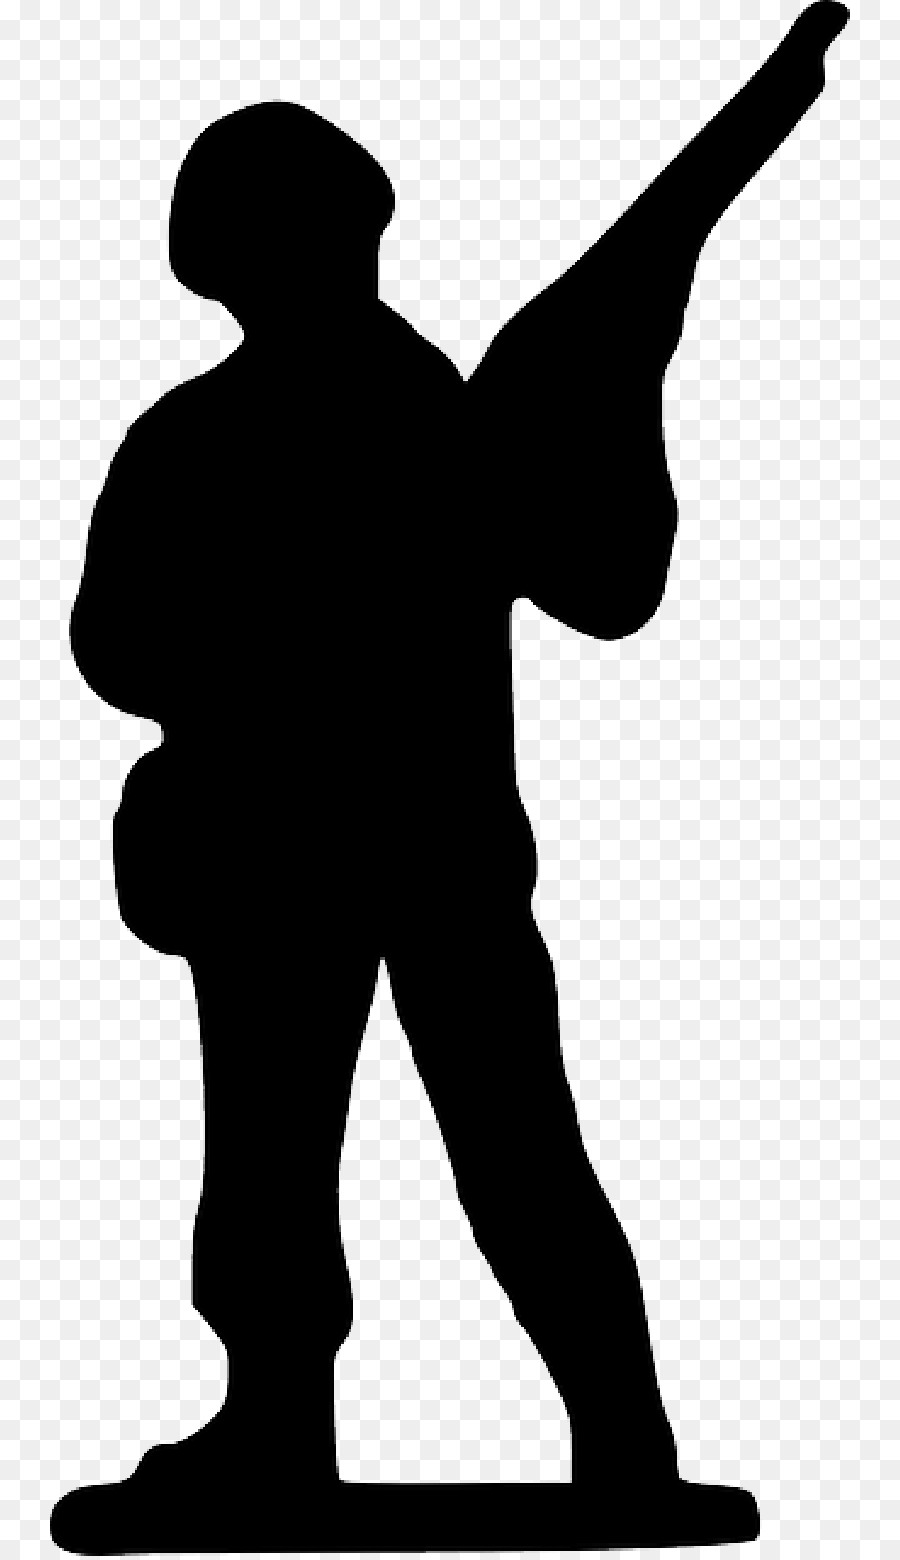 Soldier Silhouette Clip art - Soldier png download - 500*500 - Free ...